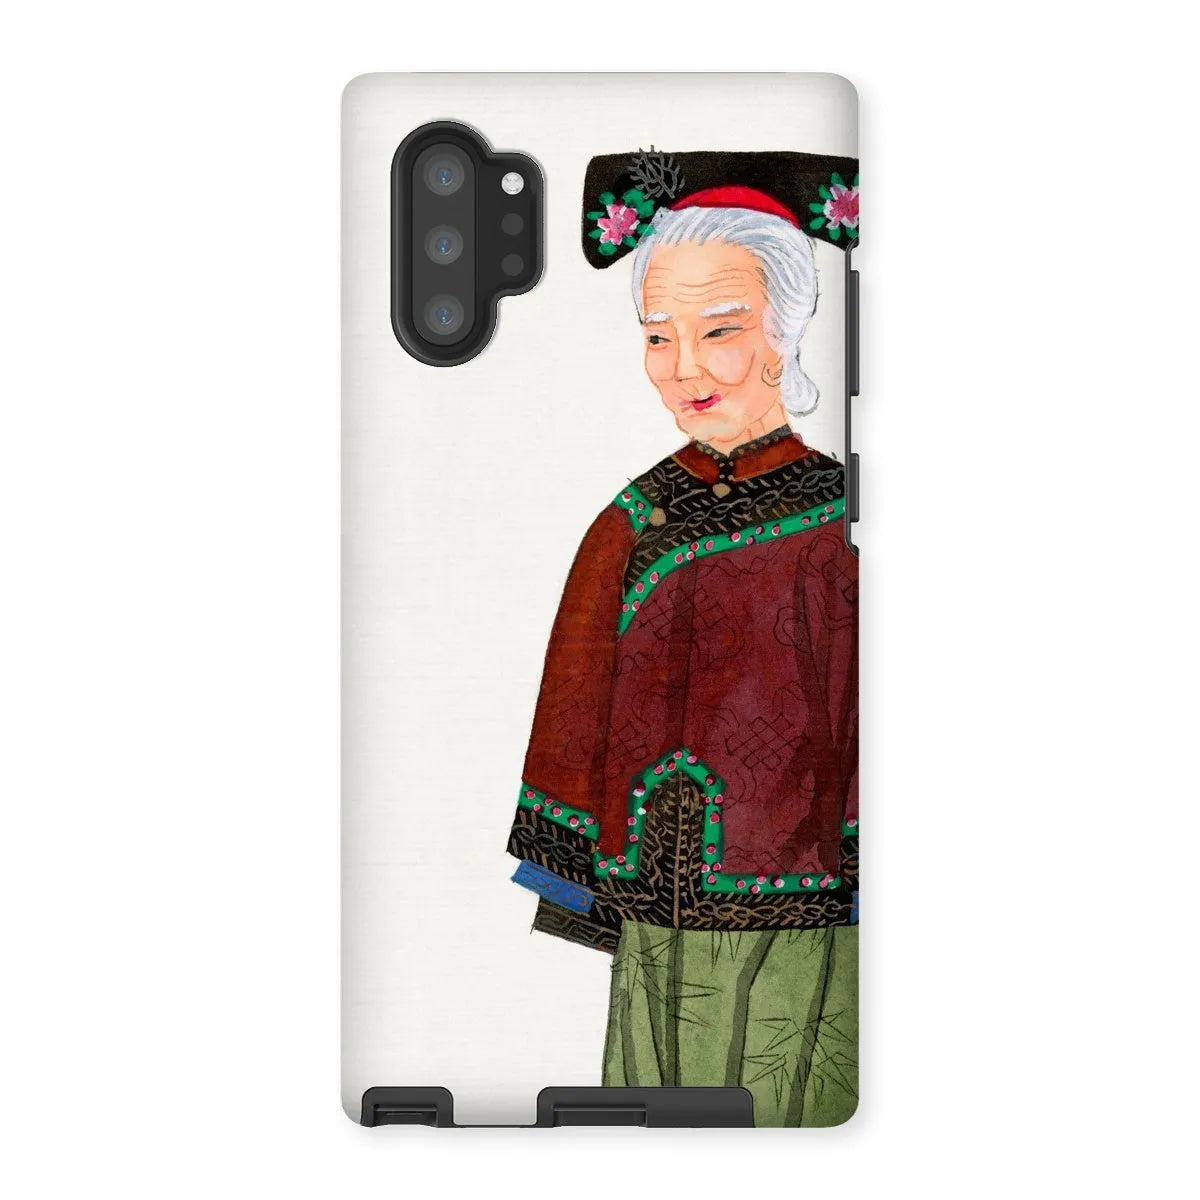 Grand Dame Too - Aesthetic Chinese Art Phone Case - Samsung Galaxy Note 10p / Matte - Mobile Phone Cases - Aesthetic Art